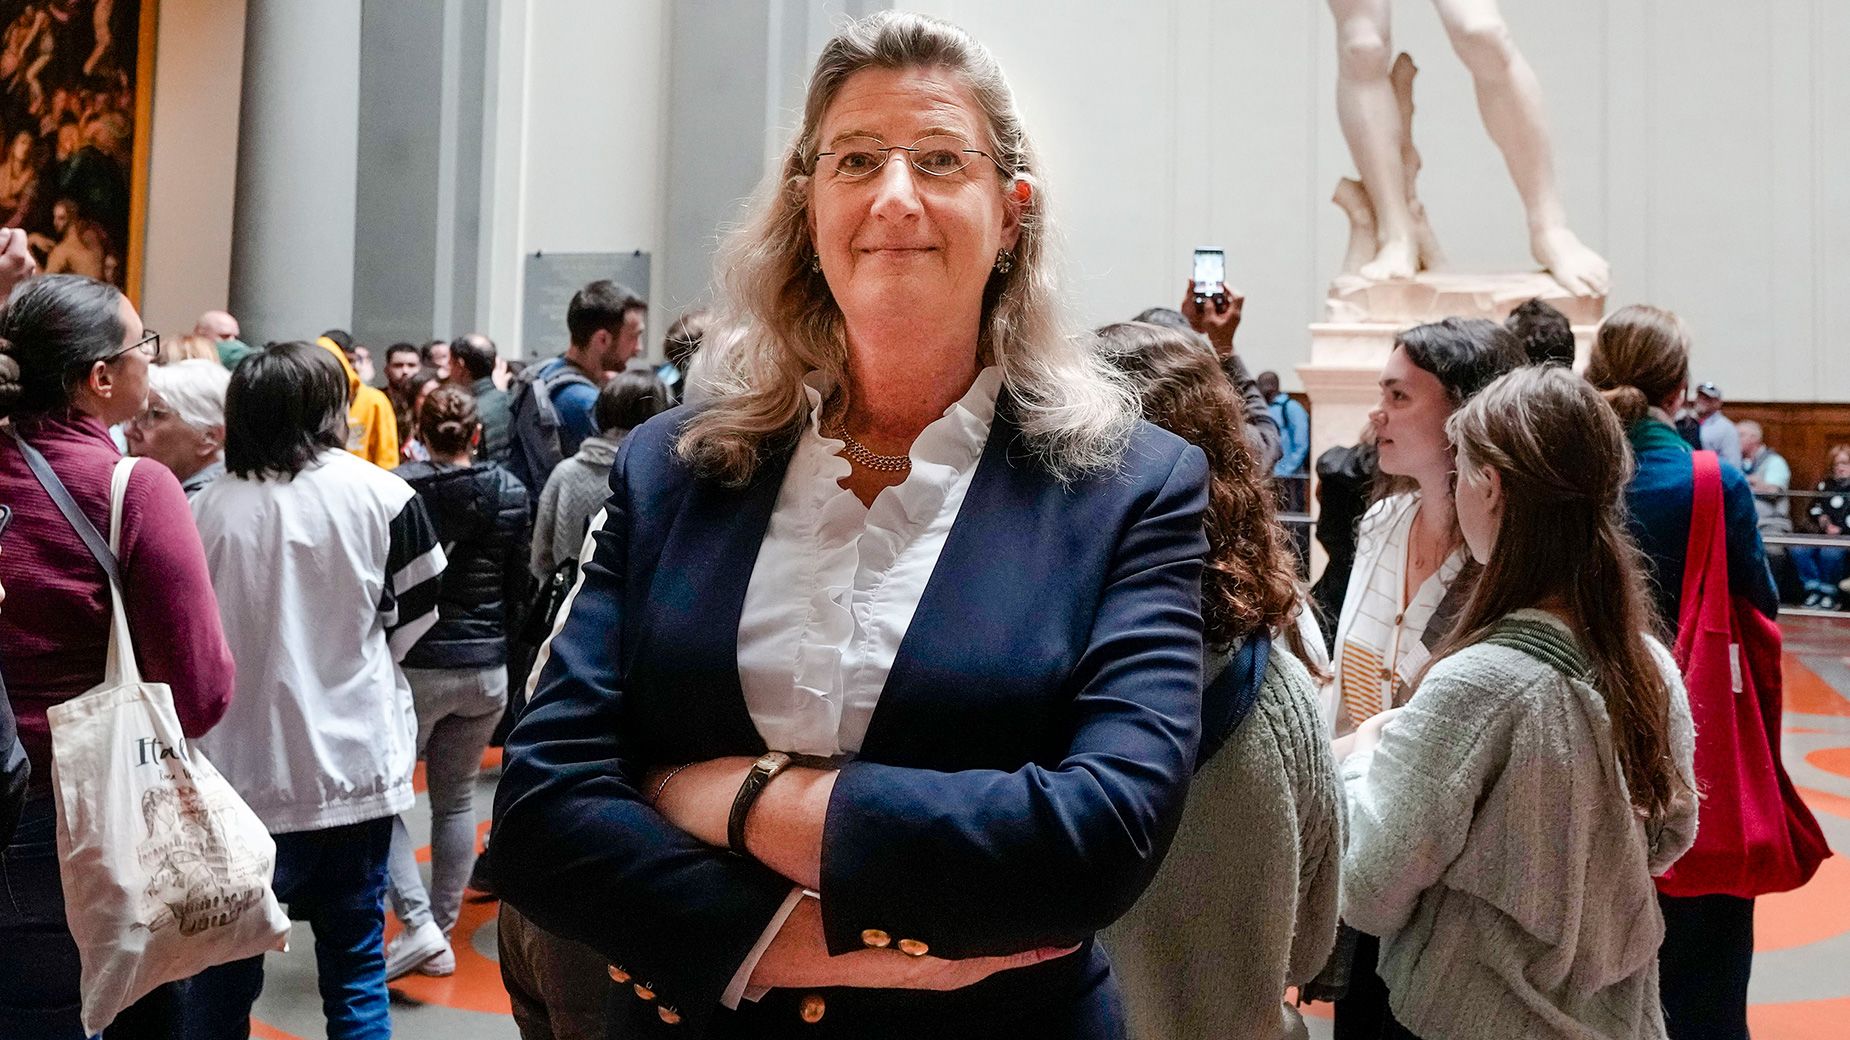 Cecilie Hollberg, director of the Galleria dell’Accademia, has come under fire for her comments regarding tourism in Florence.